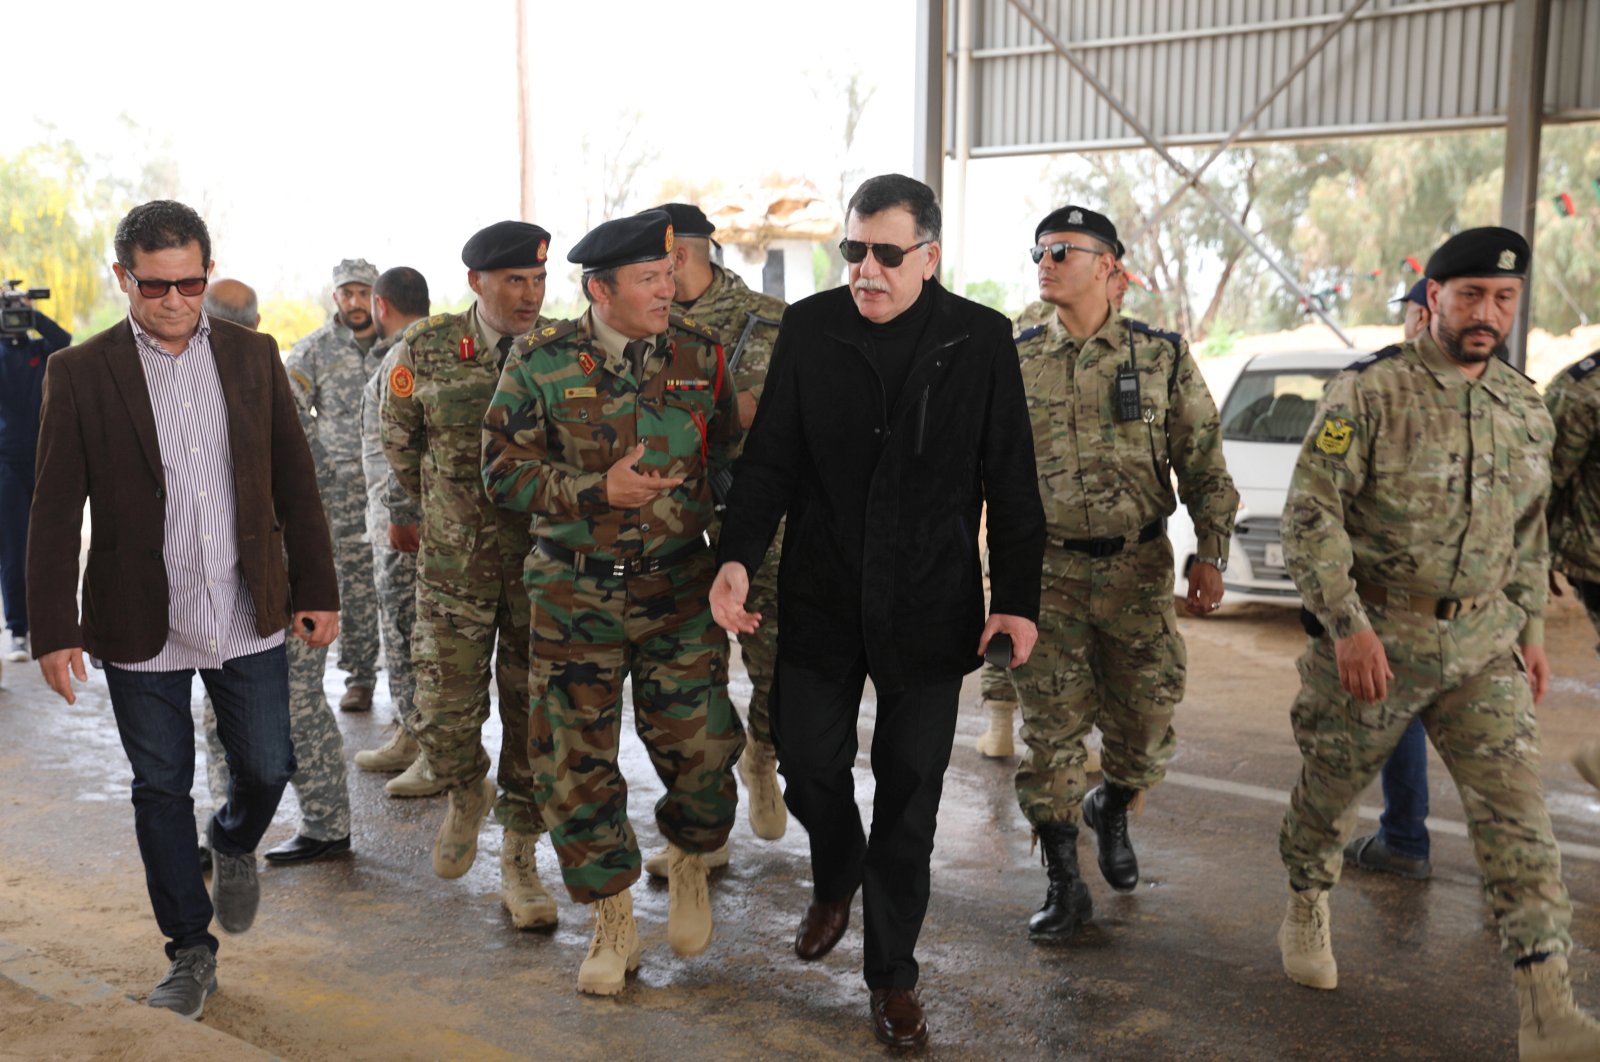 Libyan Prime Minister Fayez al-Sarraj arrives at a checkpoint after Government of National Accord (GNA) forces retook it from Khalifa Haftar-aligned militias, west of Tripoli, Libya, April 5, 2019. (Reuters Photo)